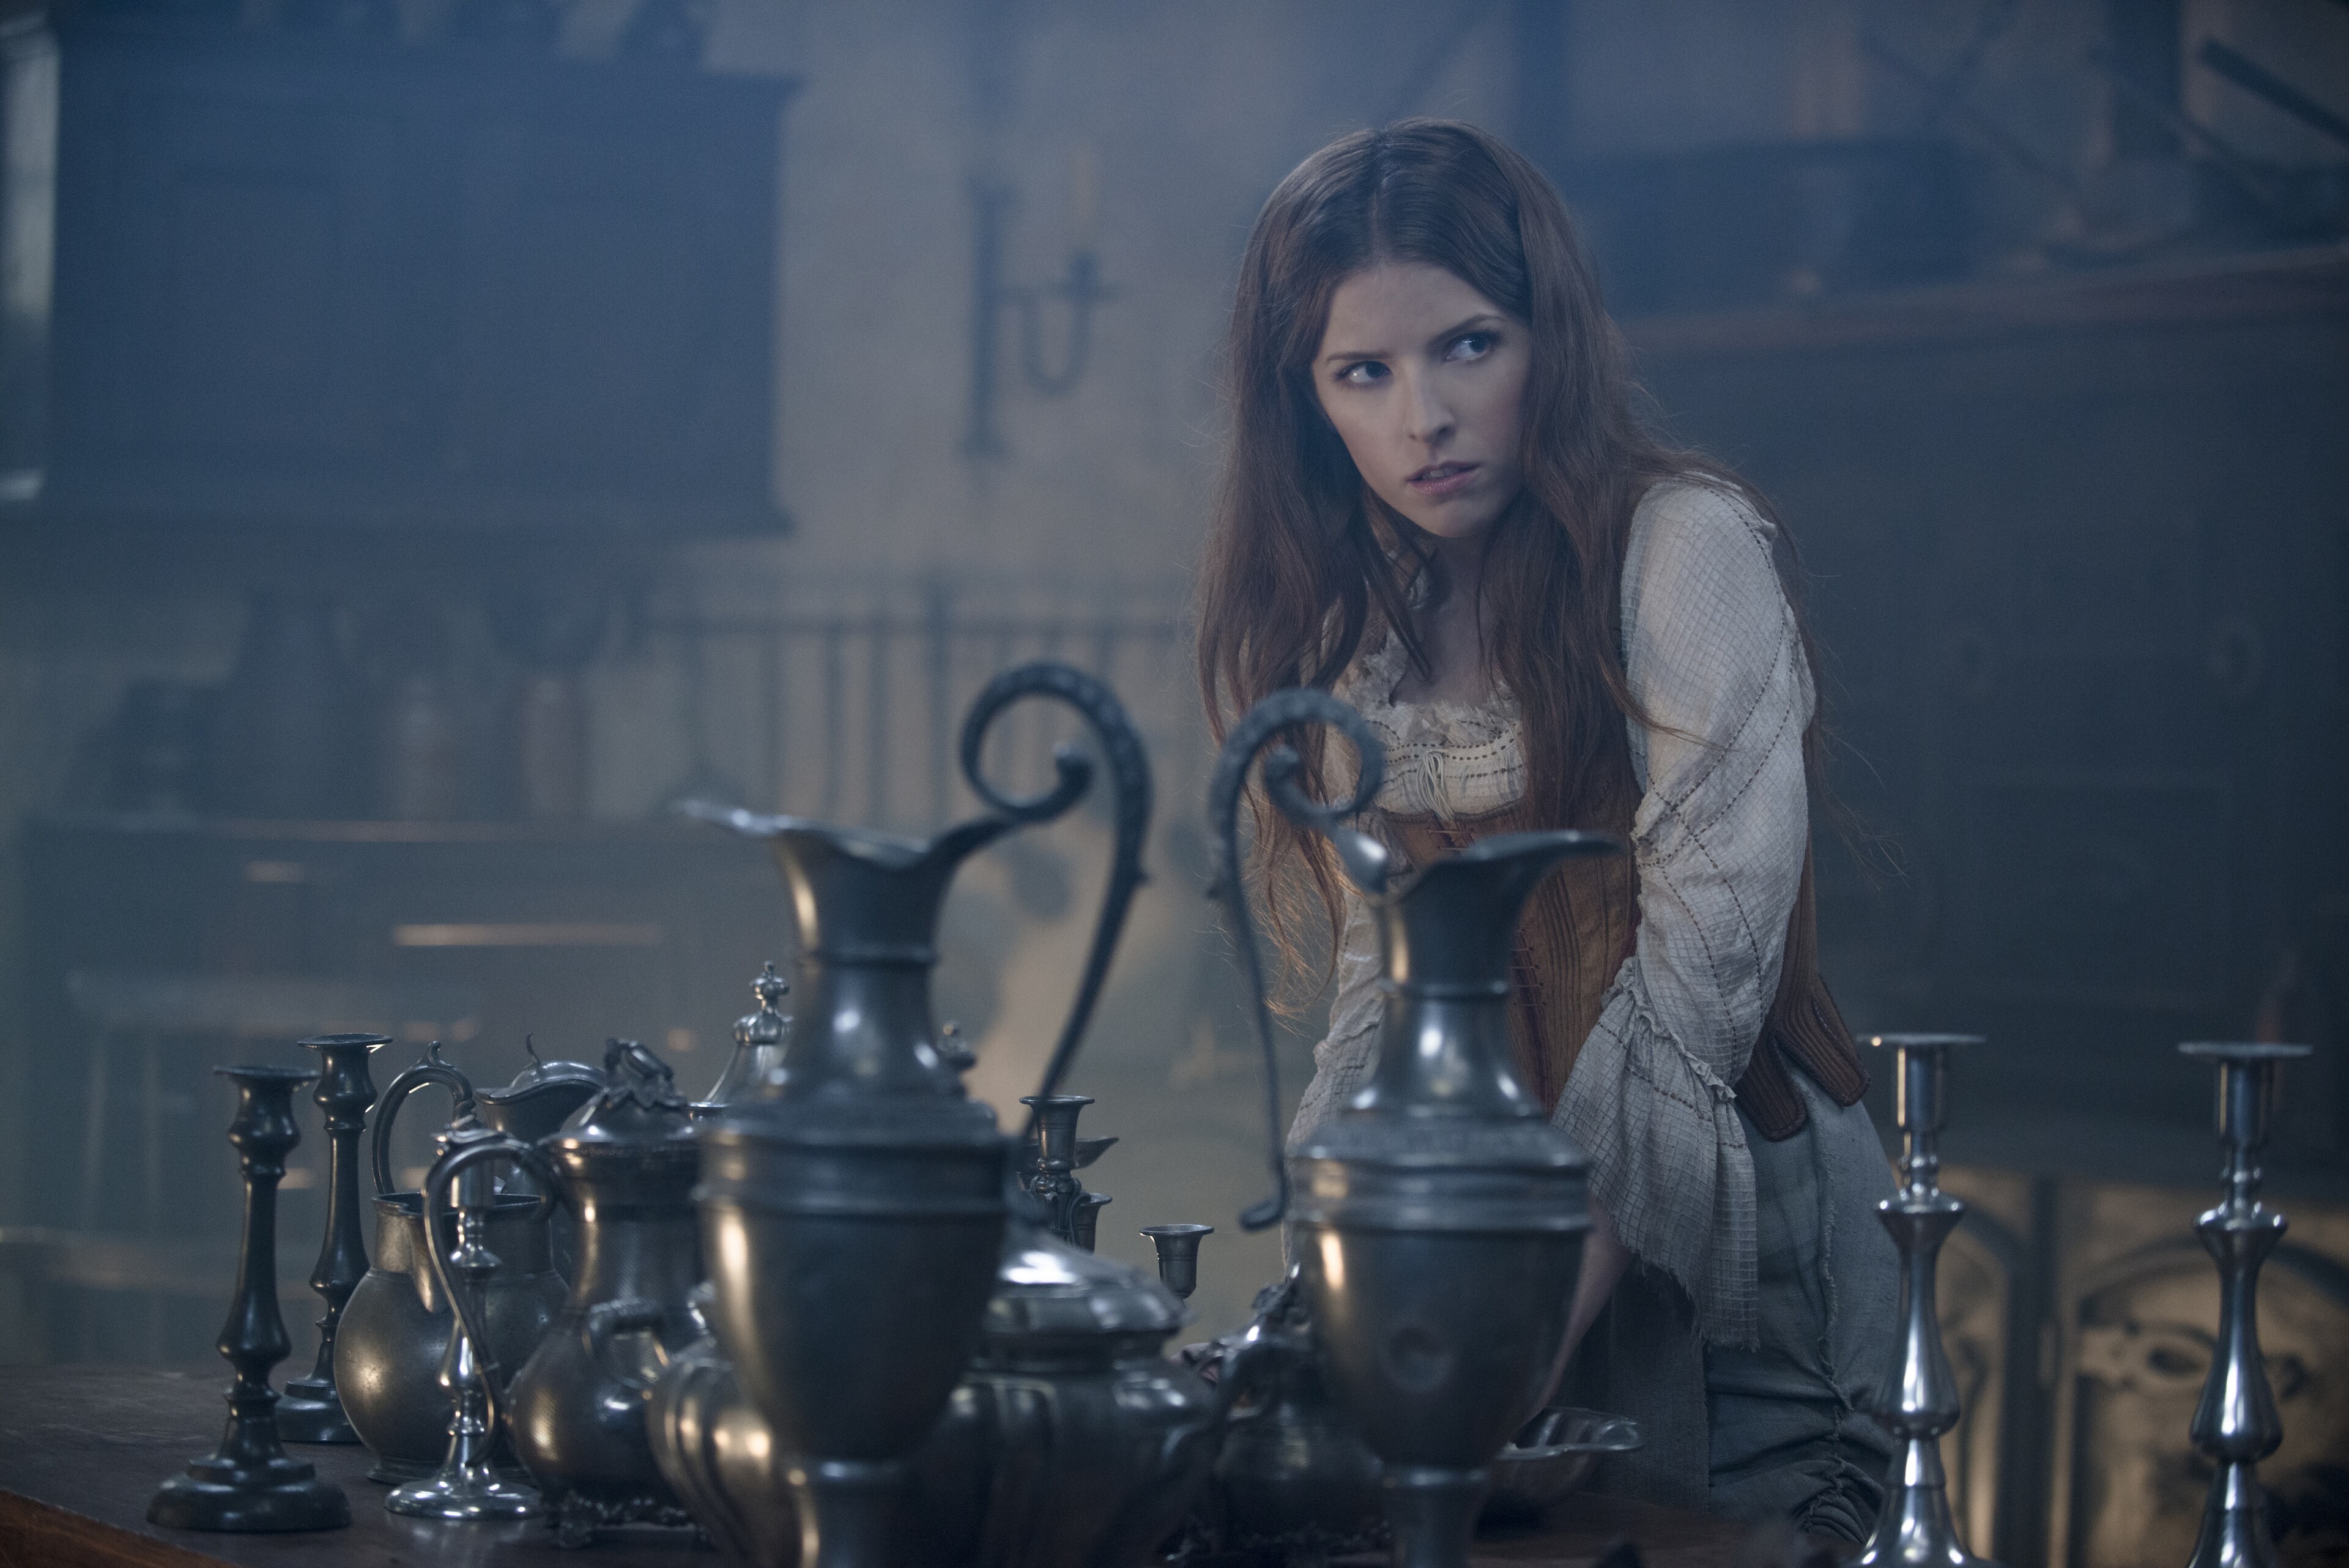 Anna Kendrick stars as Cinderella in “Into the Woods"